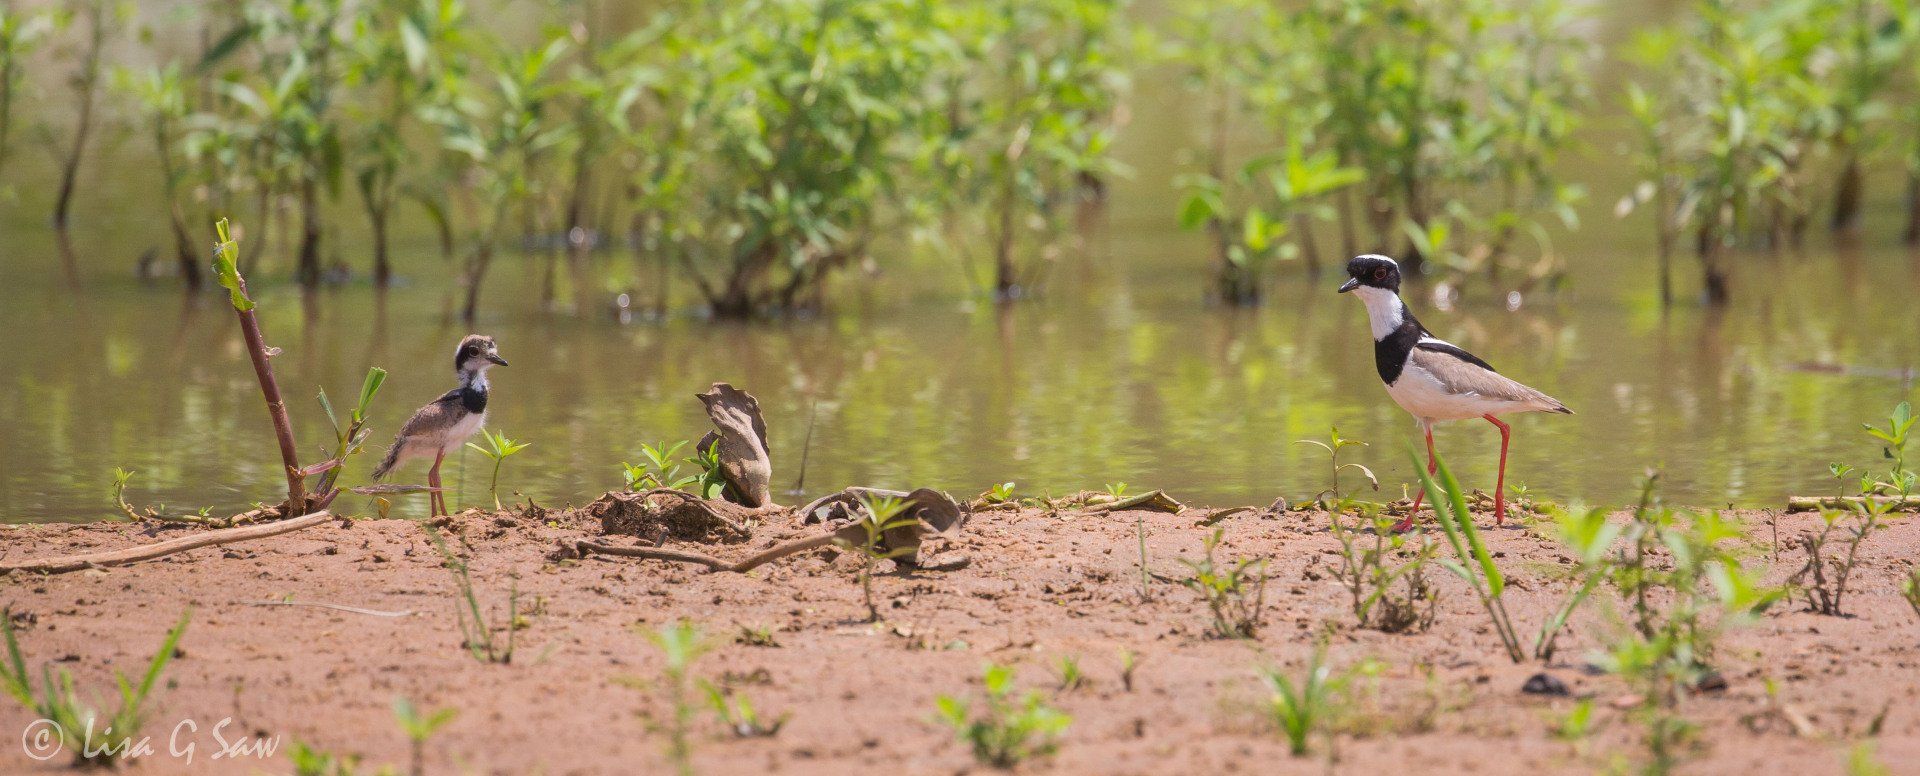 Adult Pied Plover and chick